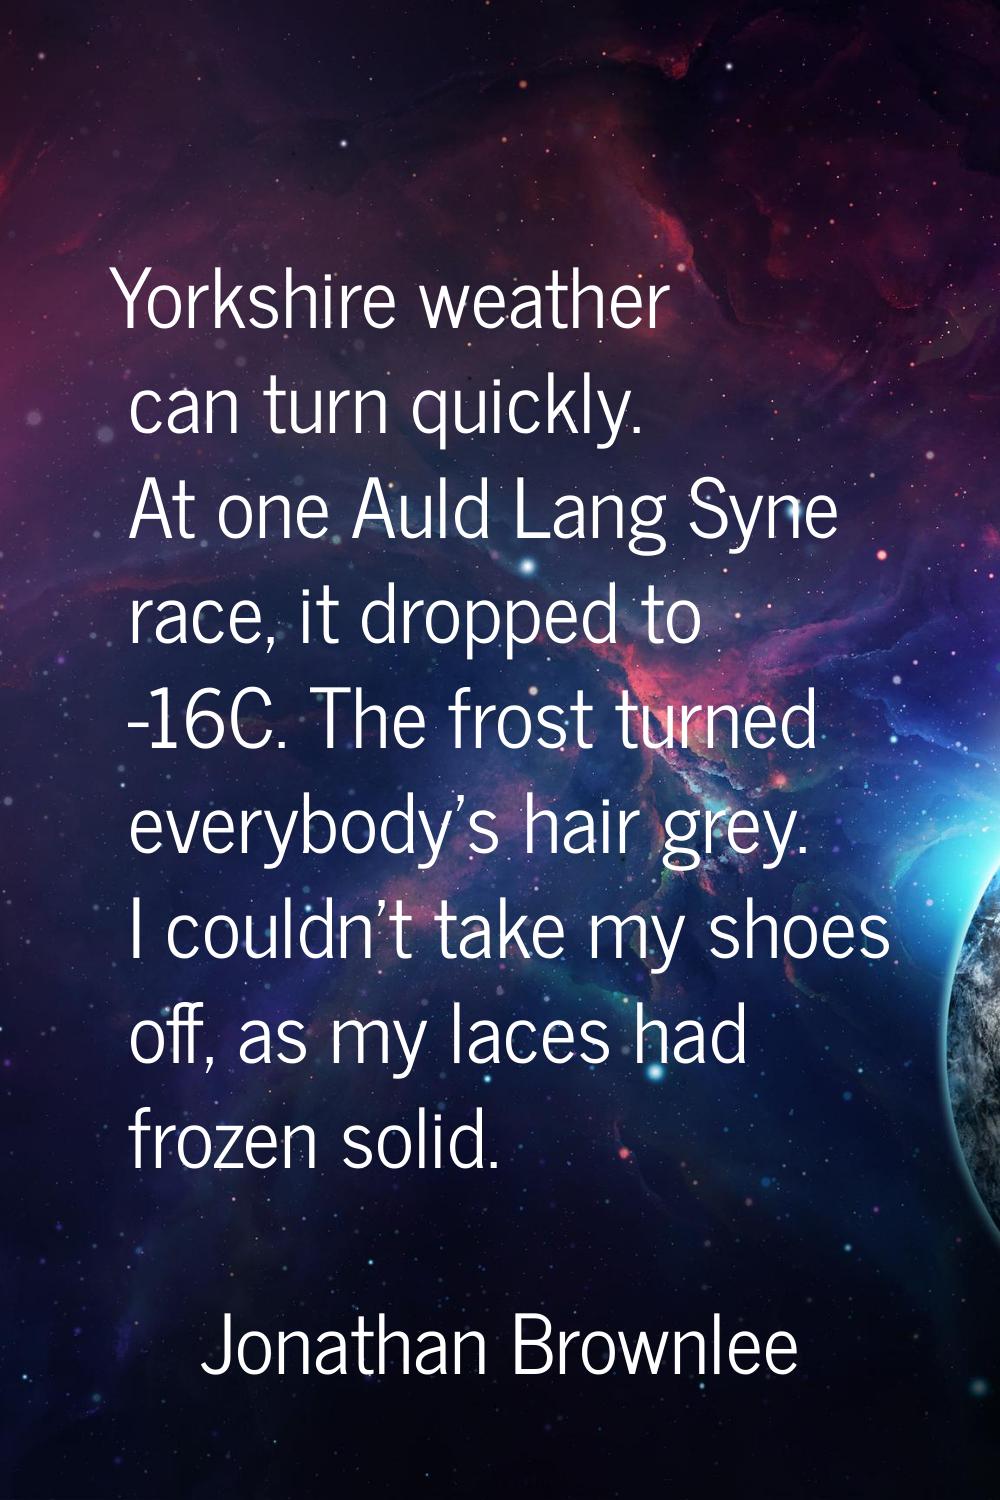 Yorkshire weather can turn quickly. At one Auld Lang Syne race, it dropped to -16C. The frost turne